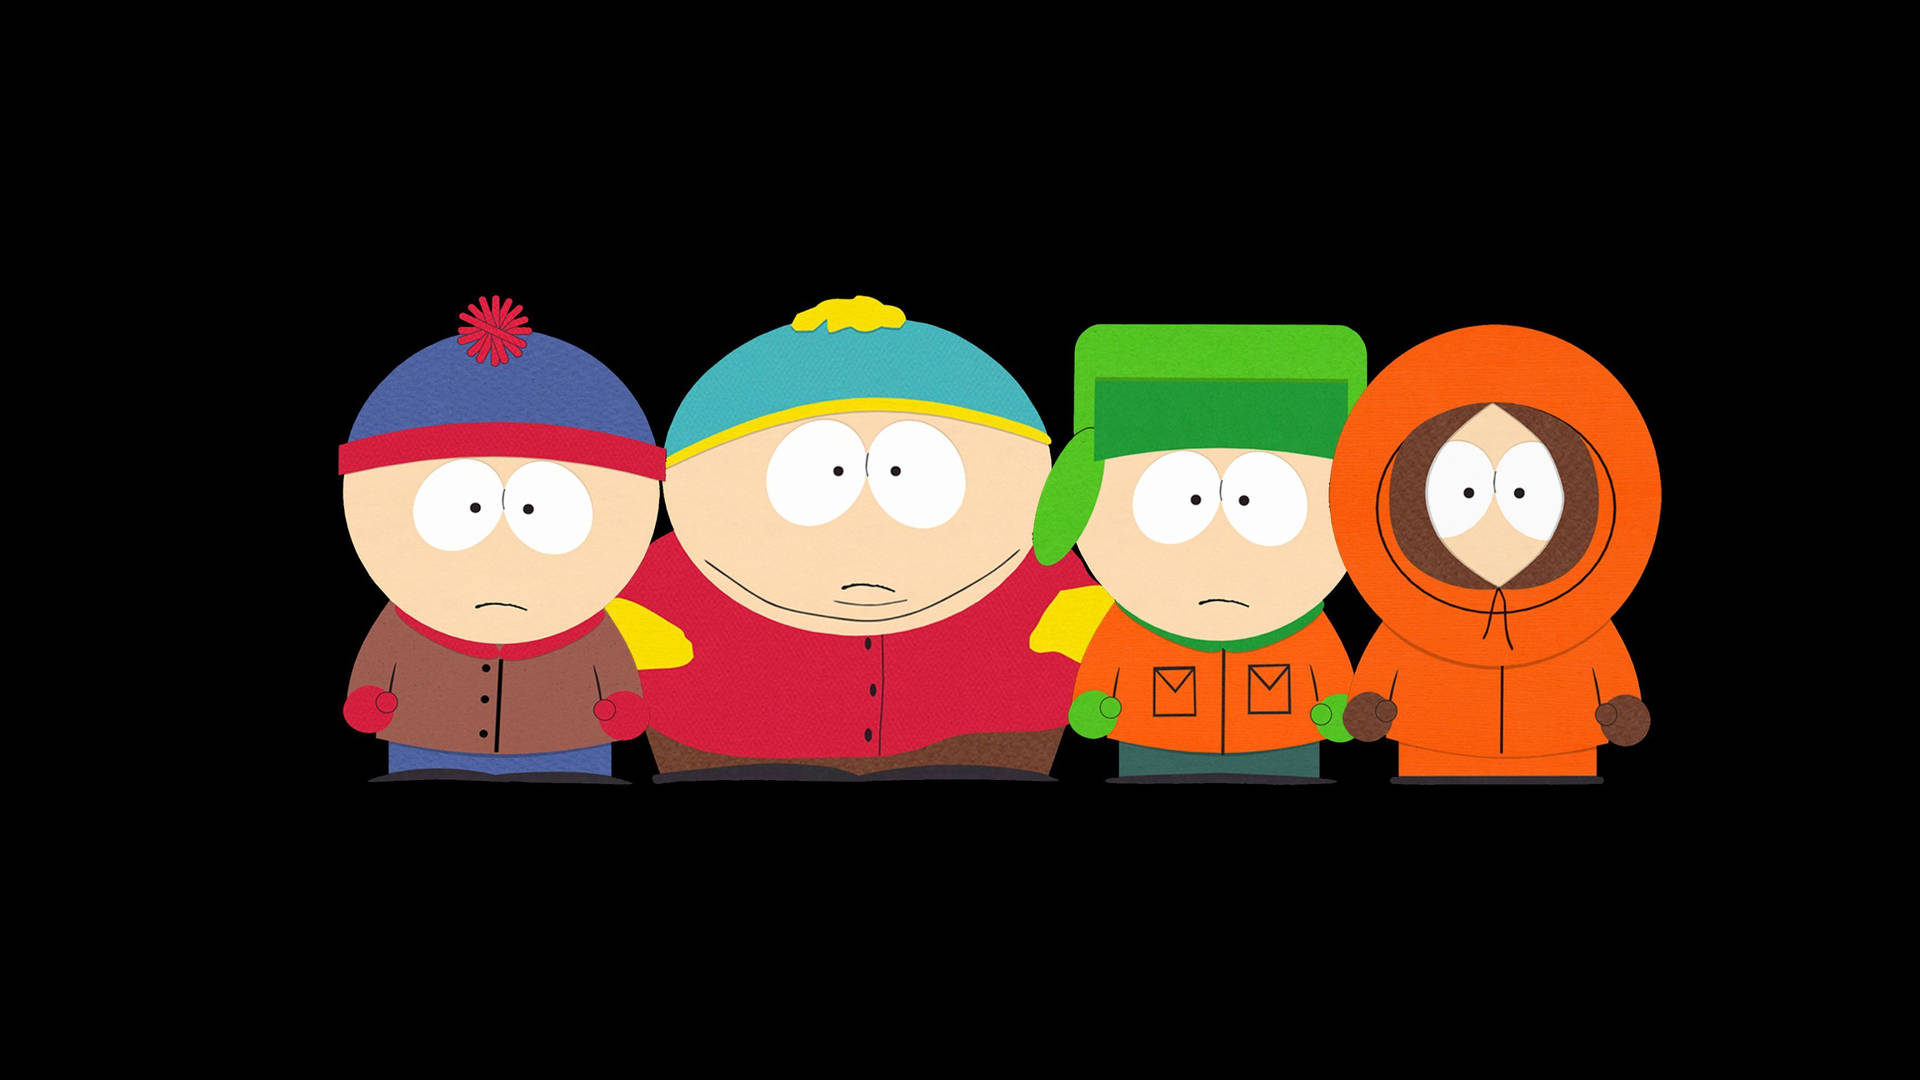 South Park iPhone Wallpapers  Top Free South Park iPhone Backgrounds   WallpaperAccess